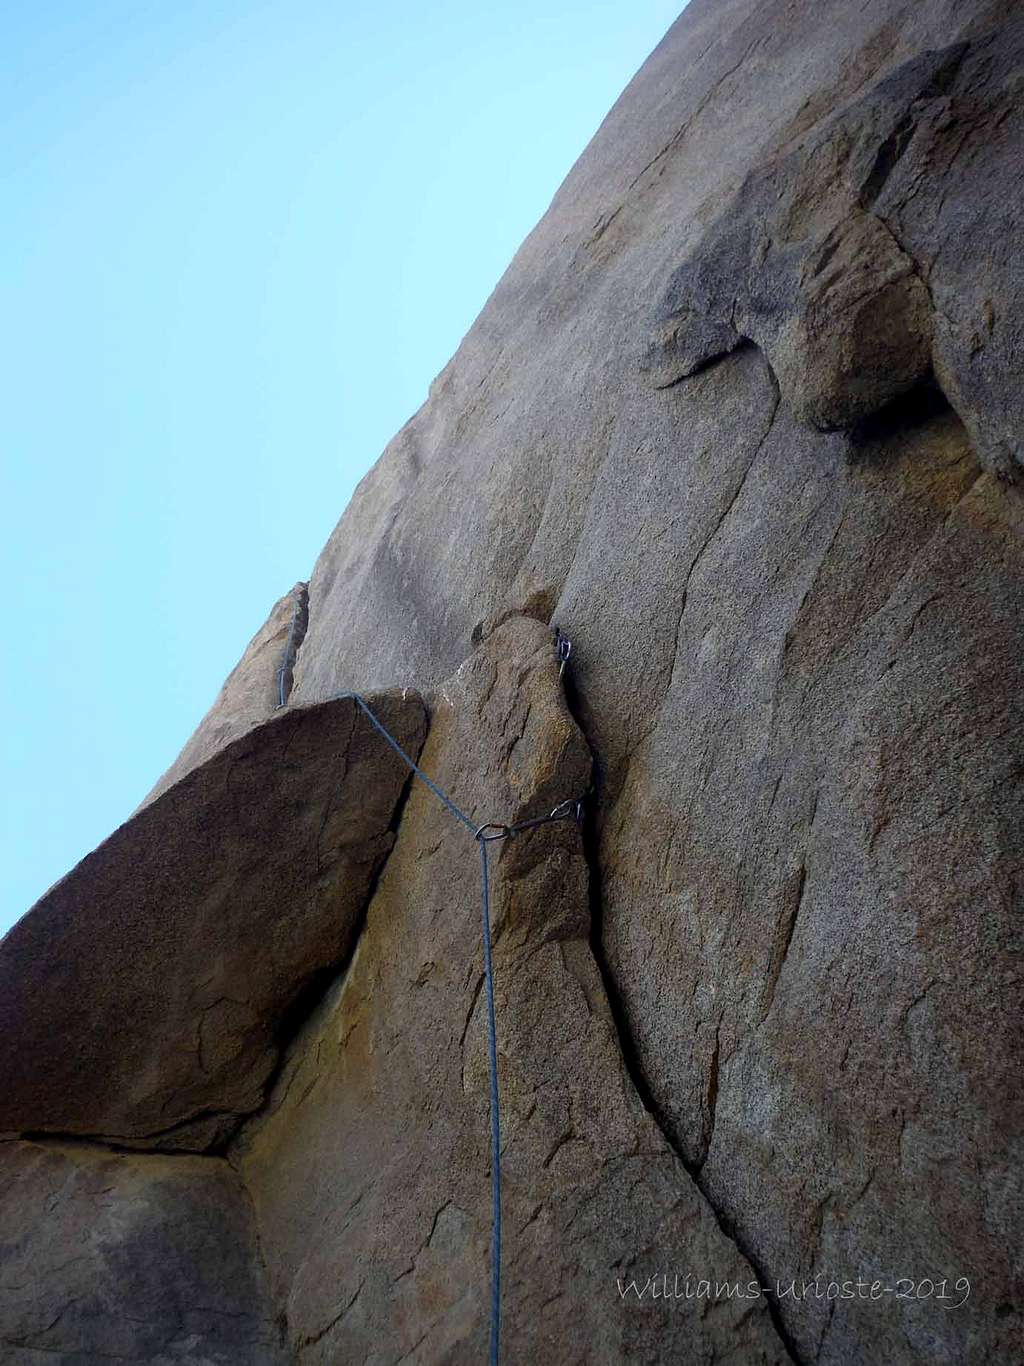 I get by with a Little Help from my Friends, 5.10a**